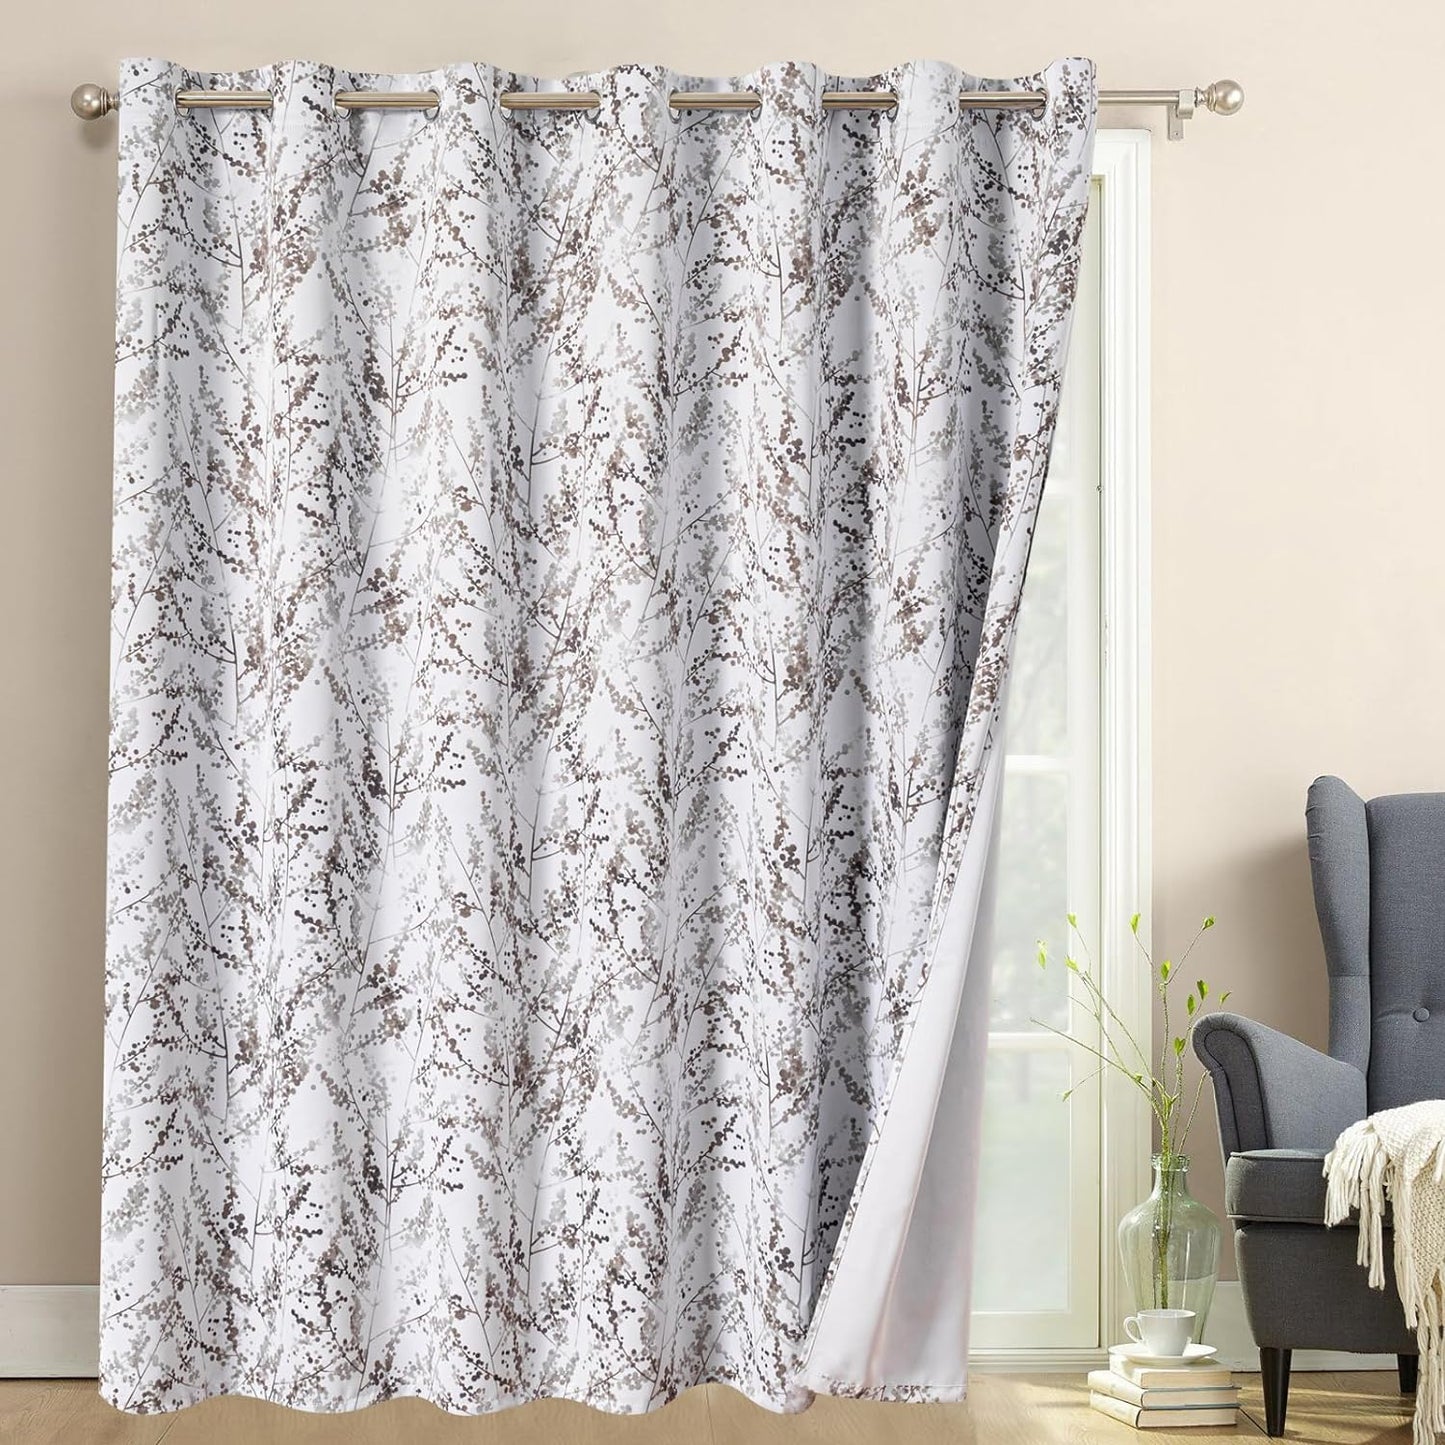 MYSKY HOME Curtains for Bedroom 63 Inches Long Thermal Insulated Room Darkening Curtains Tree Branch Print Pattern Classic Curtains for Dining Room Home Decor Grommet Top Drapes, Sage, 2 Pieces  MYSKY HOME Branch-Brown 100"W X 84"L 